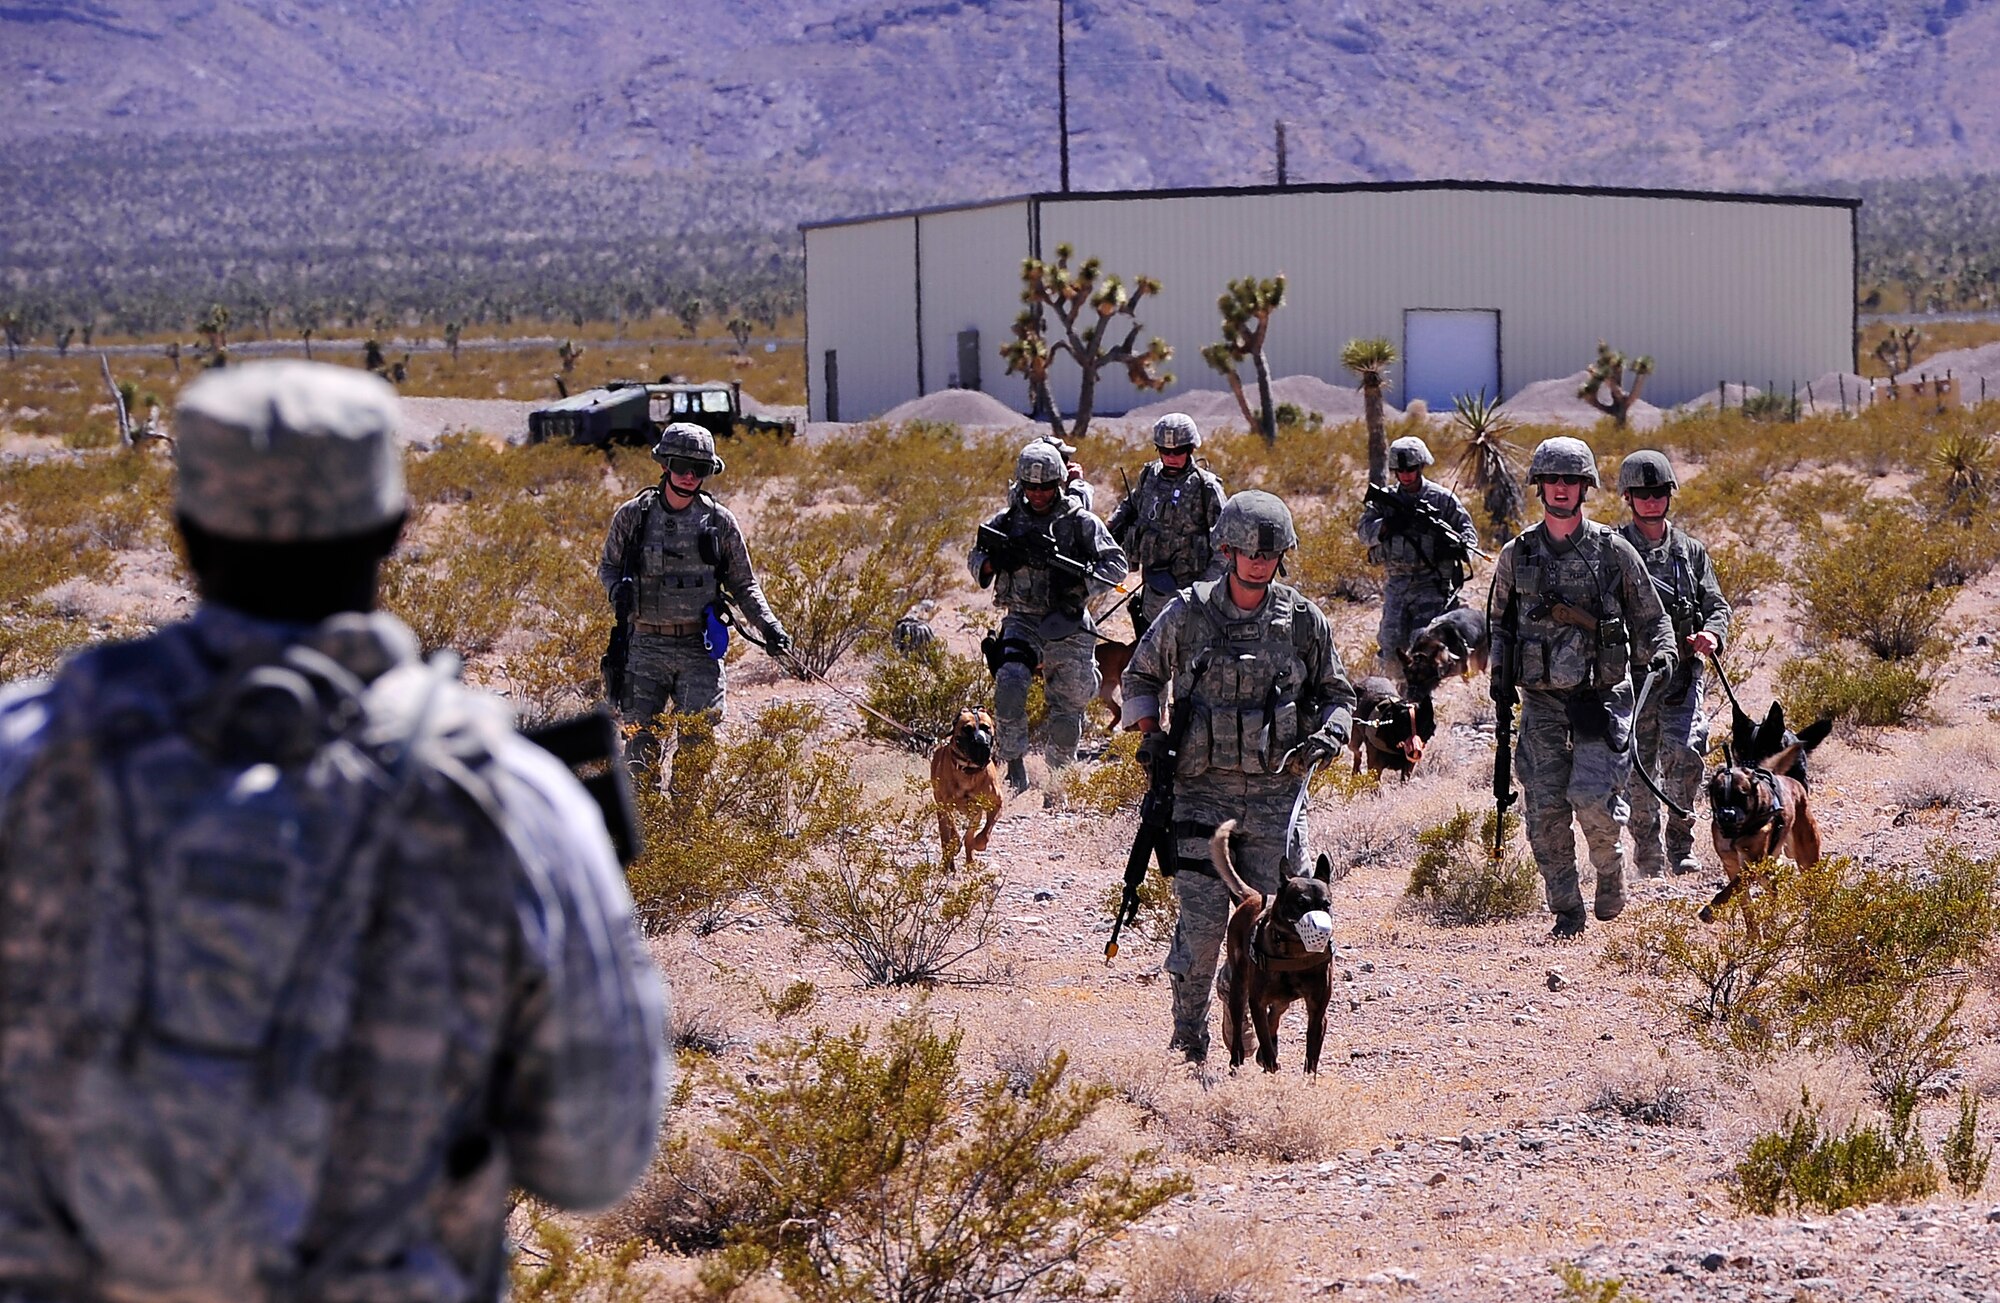 NEVADA TEST AND TRAINING RANGE, Nev.-- Military working dogs and their handlers assigned to the 99th Ground Combat Training Squadron make their way to a rally point after disembarking from an HH-60 Pave Hawk helicopter to conduct pre-deployment training outside of Las Vegas June 14, 2013.  Military working dogs and their handlers attend specific training at Silver Flag Alpha prior to attending the Base Security Operations Course, which ensures MWD teams are exposed to current enemy tactics, techniques and procedures and that they are certified on all aspects of their specialized role within the Integrated Defense Operations. (U.S. Air Force photo by Staff Sgt. D.H./Released)